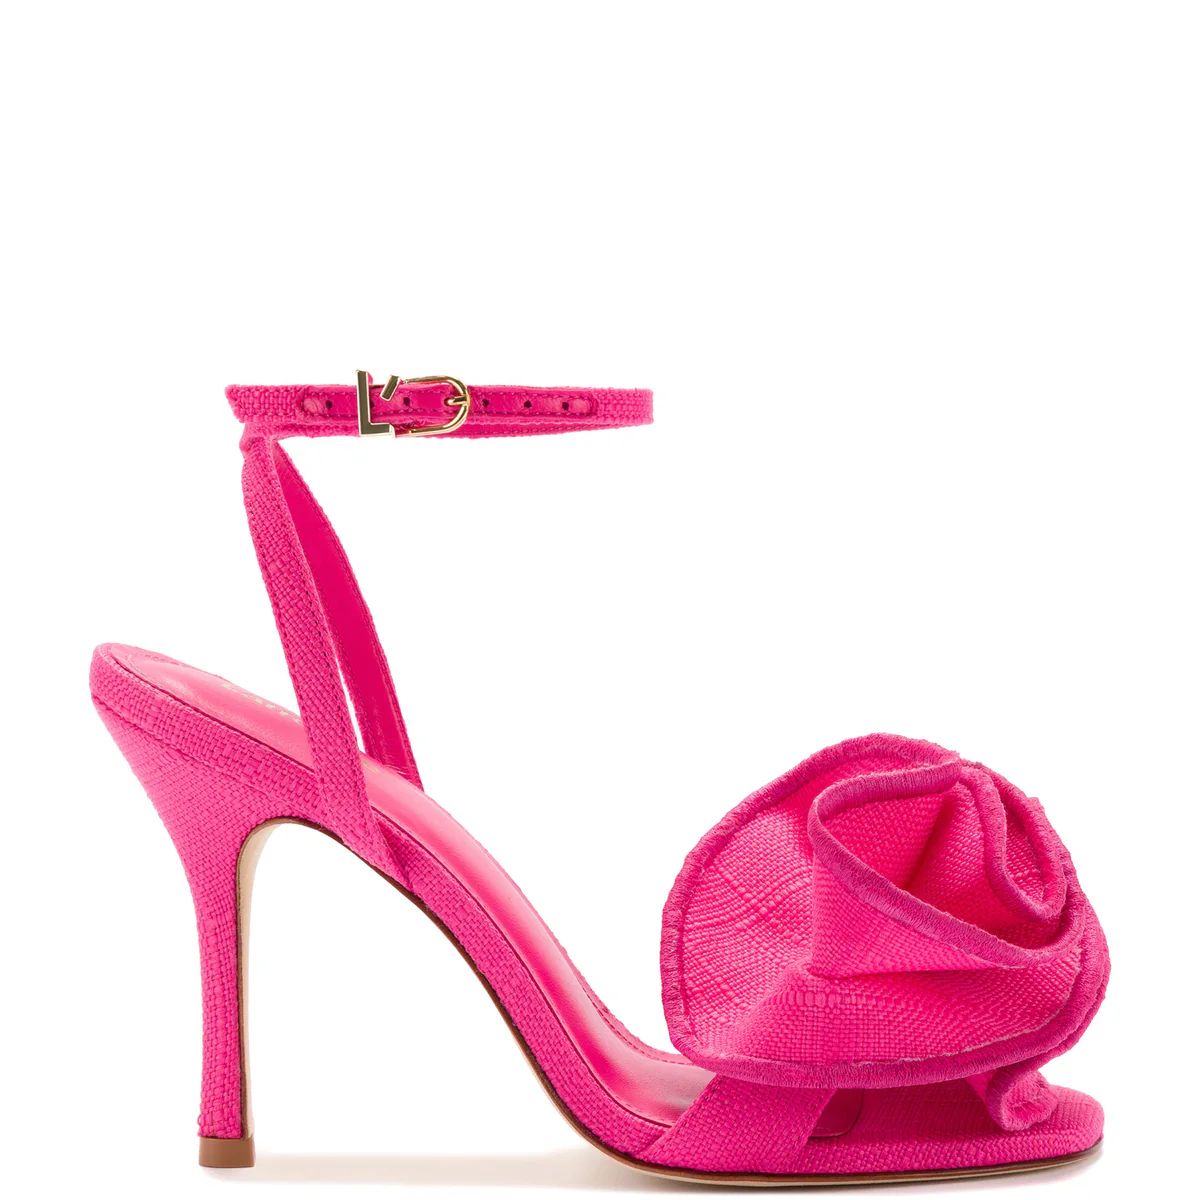 Penelope Ruffle Sandal In Pink Raffia | Over The Moon